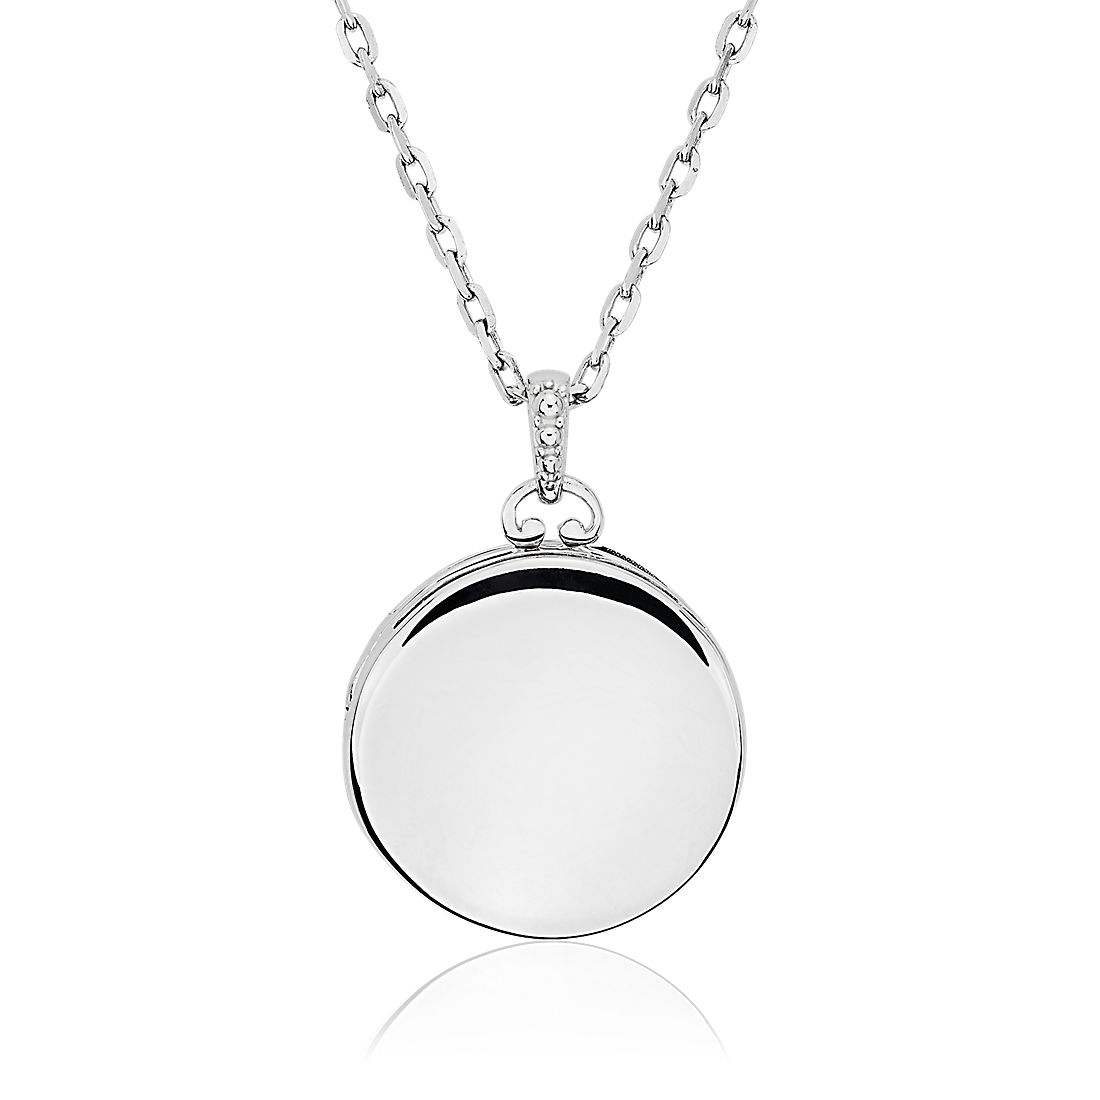 Monica Rich Kosann Engravable Locket in Sterling Silver with Sapphire Accent